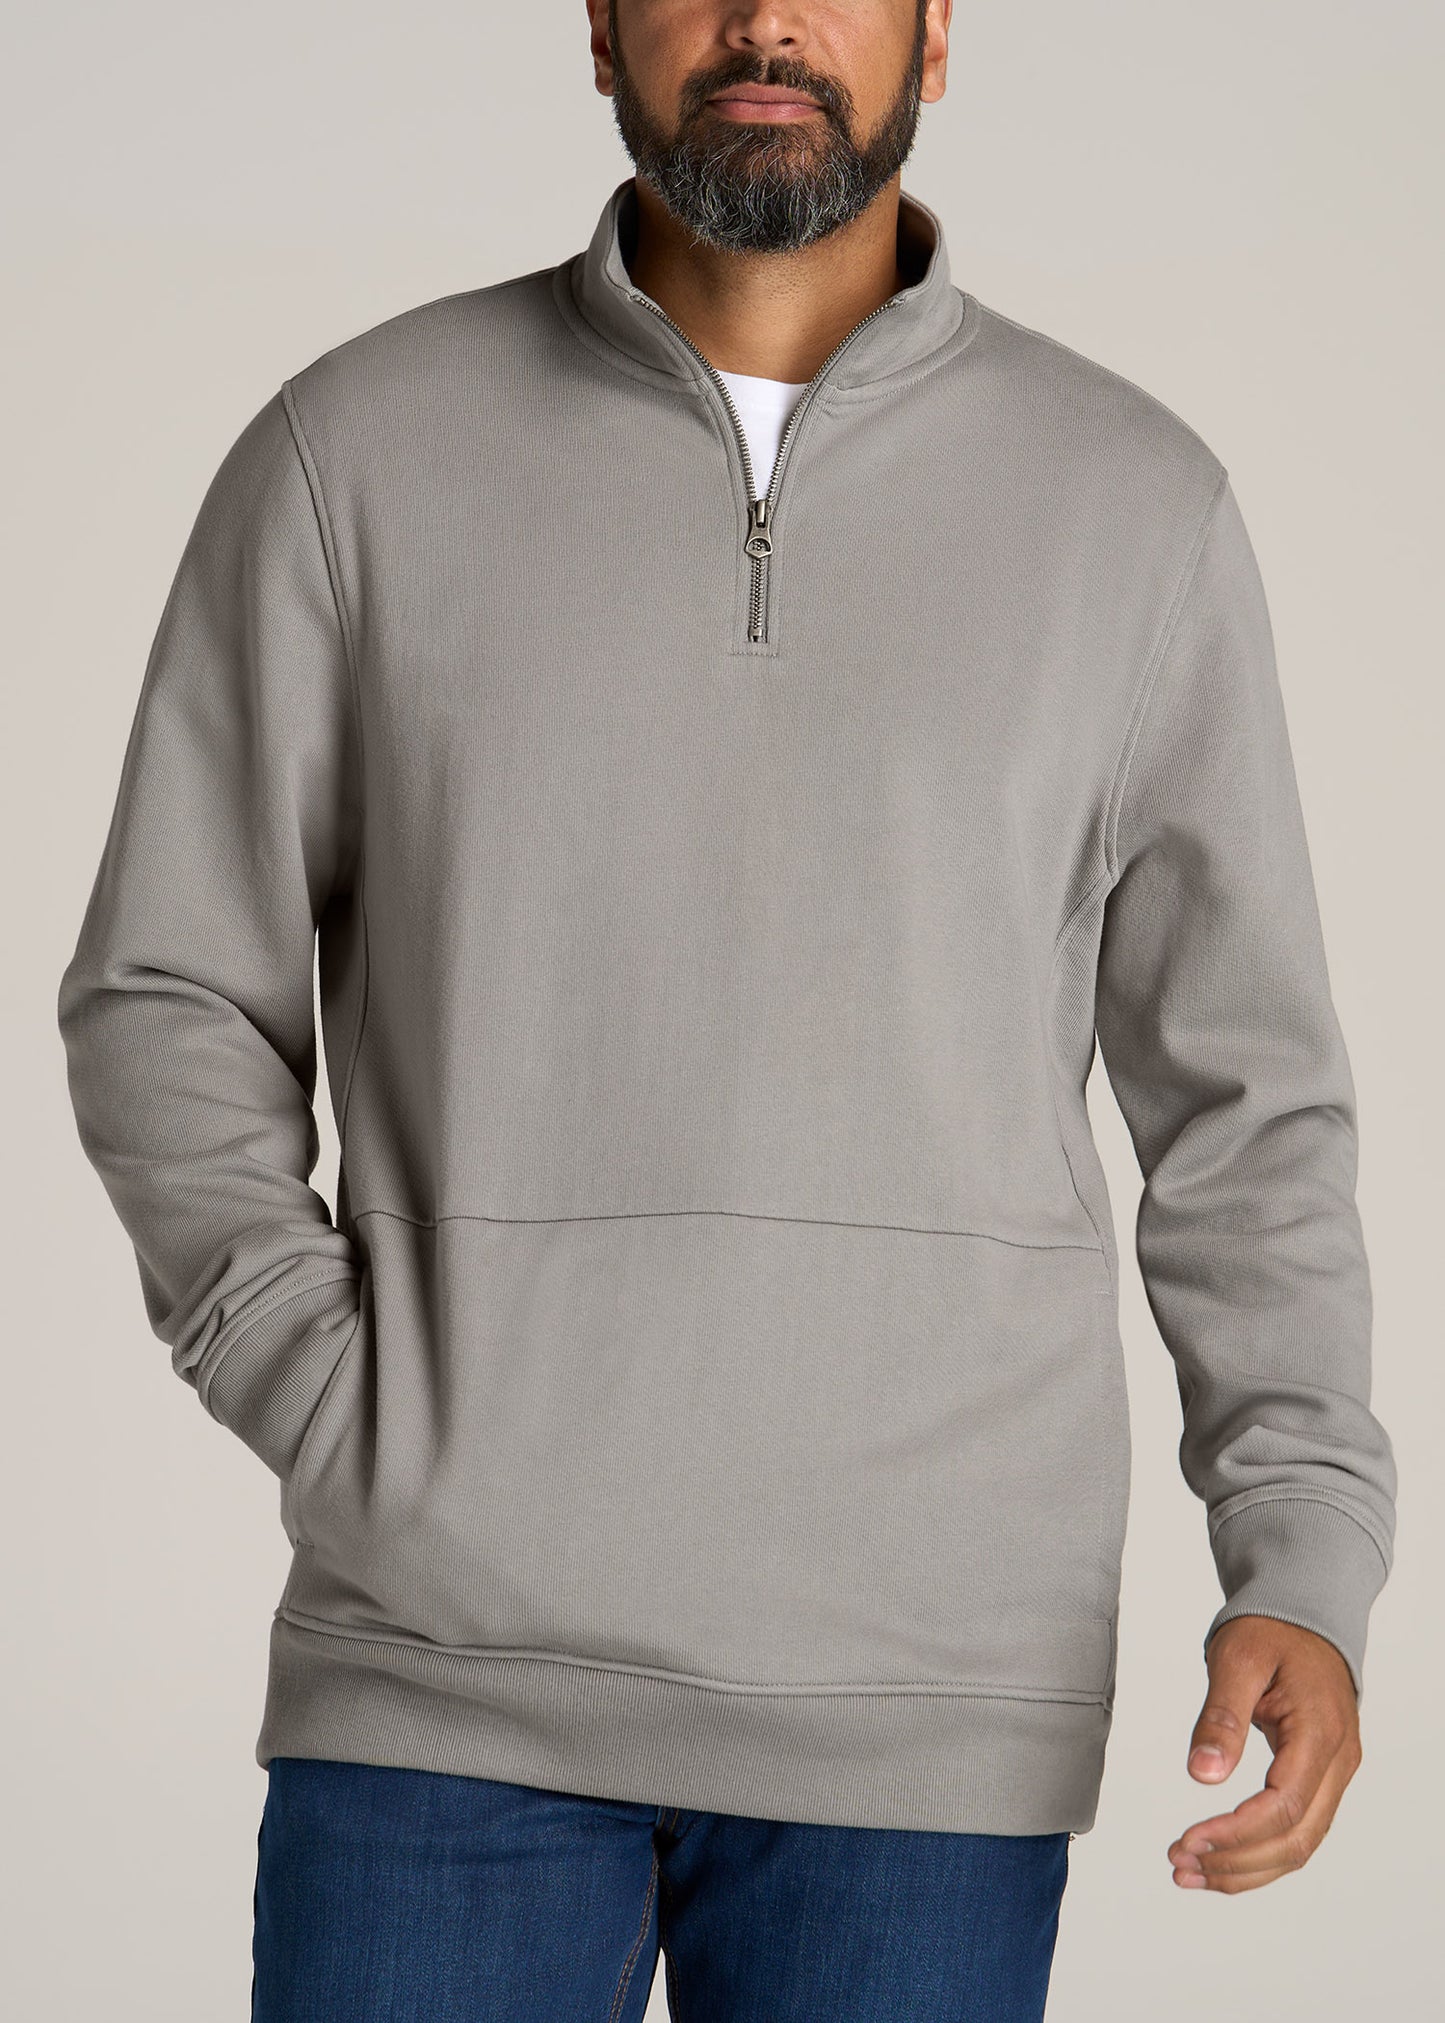 LJ-Heavyweight-French-Terry-Quarter-Zip-Pullover-Pewter-front